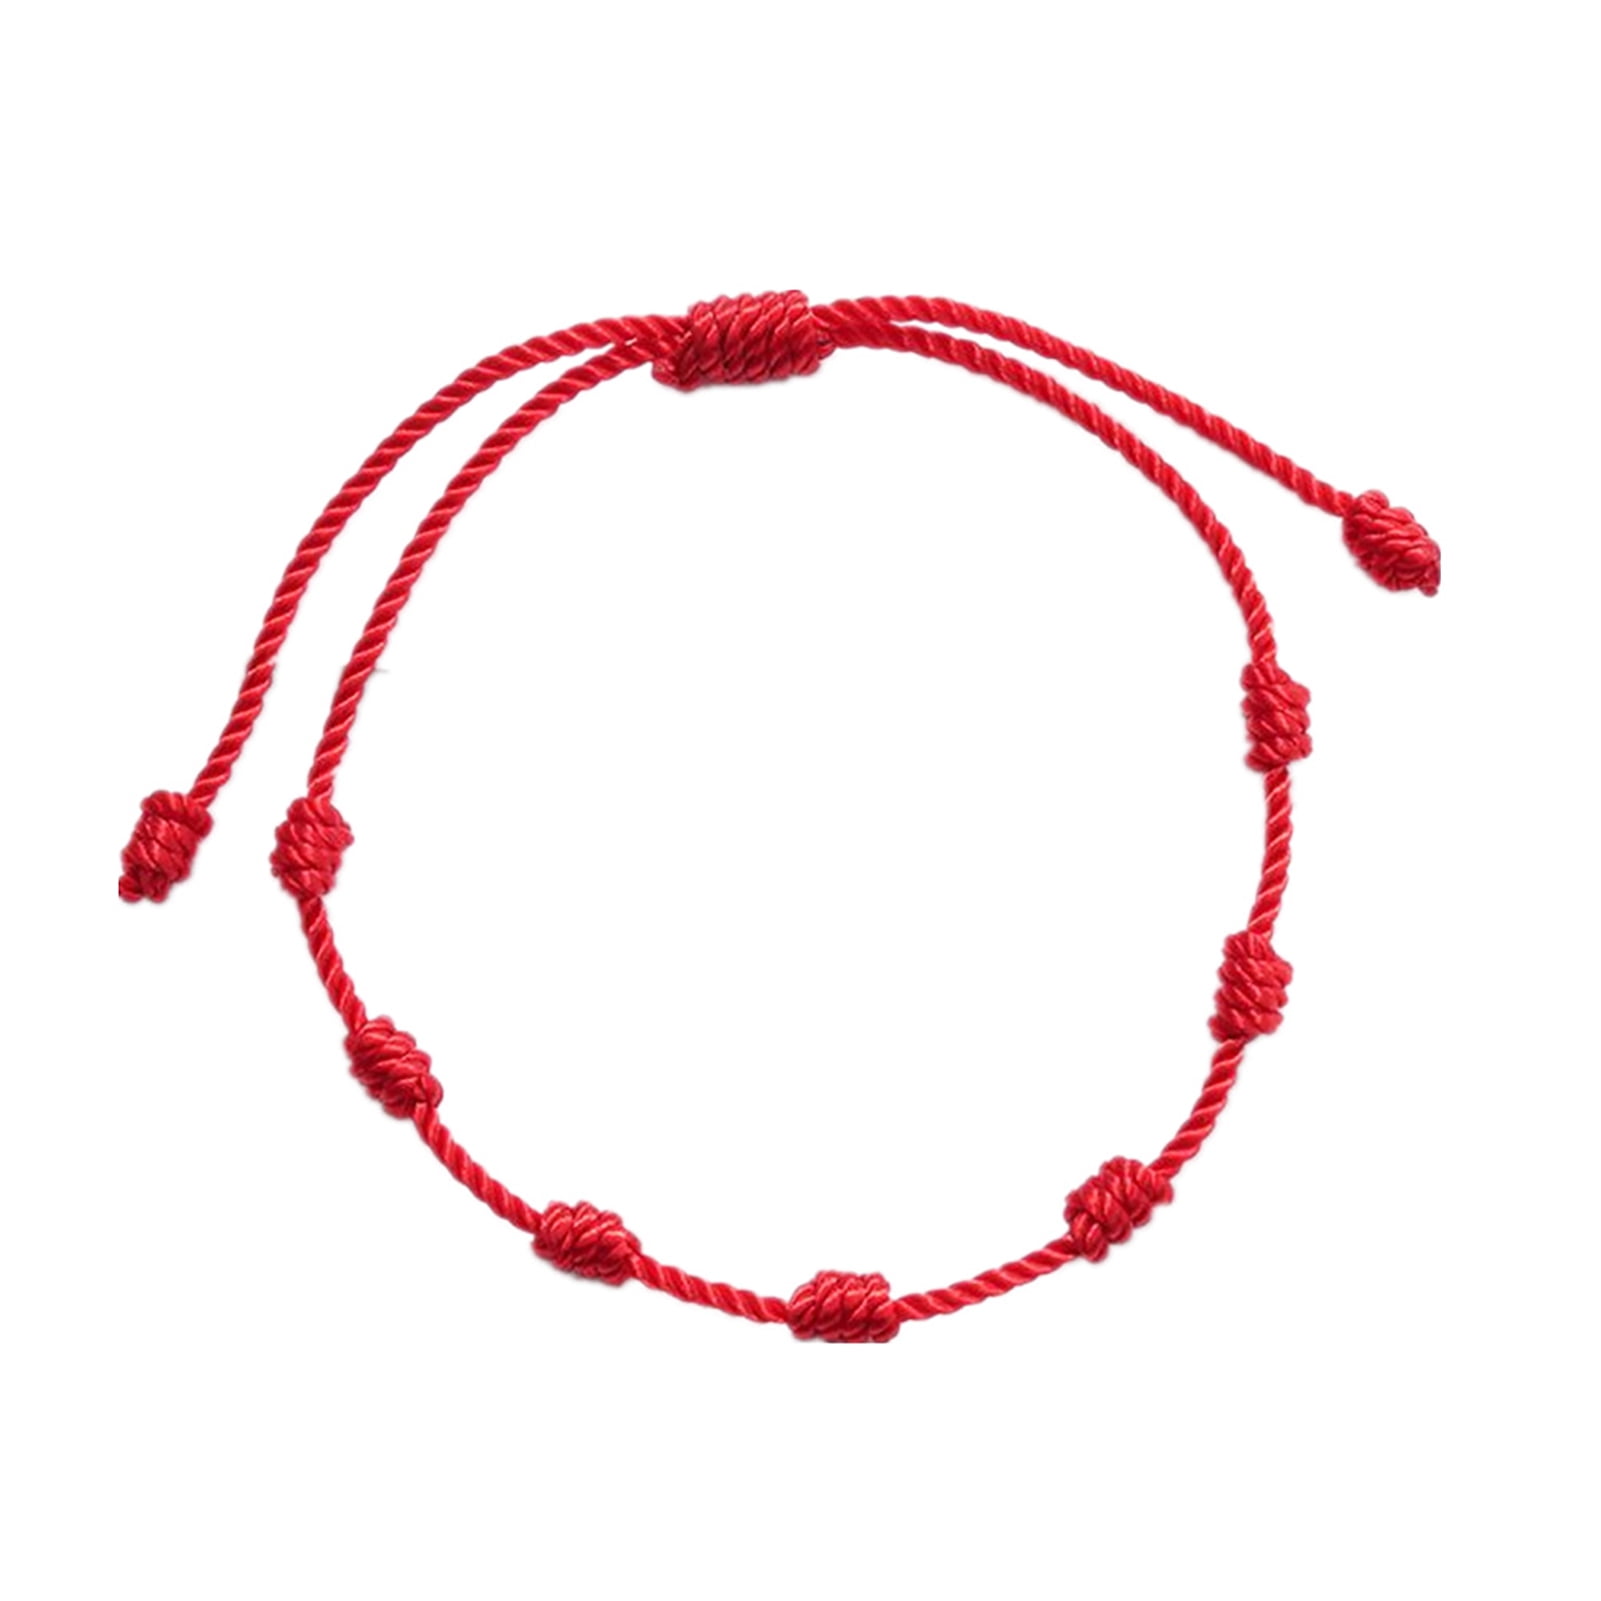 2 Pcs Lucky Red String Bracelet Kabbalah Amulet 7 Knots Protection Rope  Gift